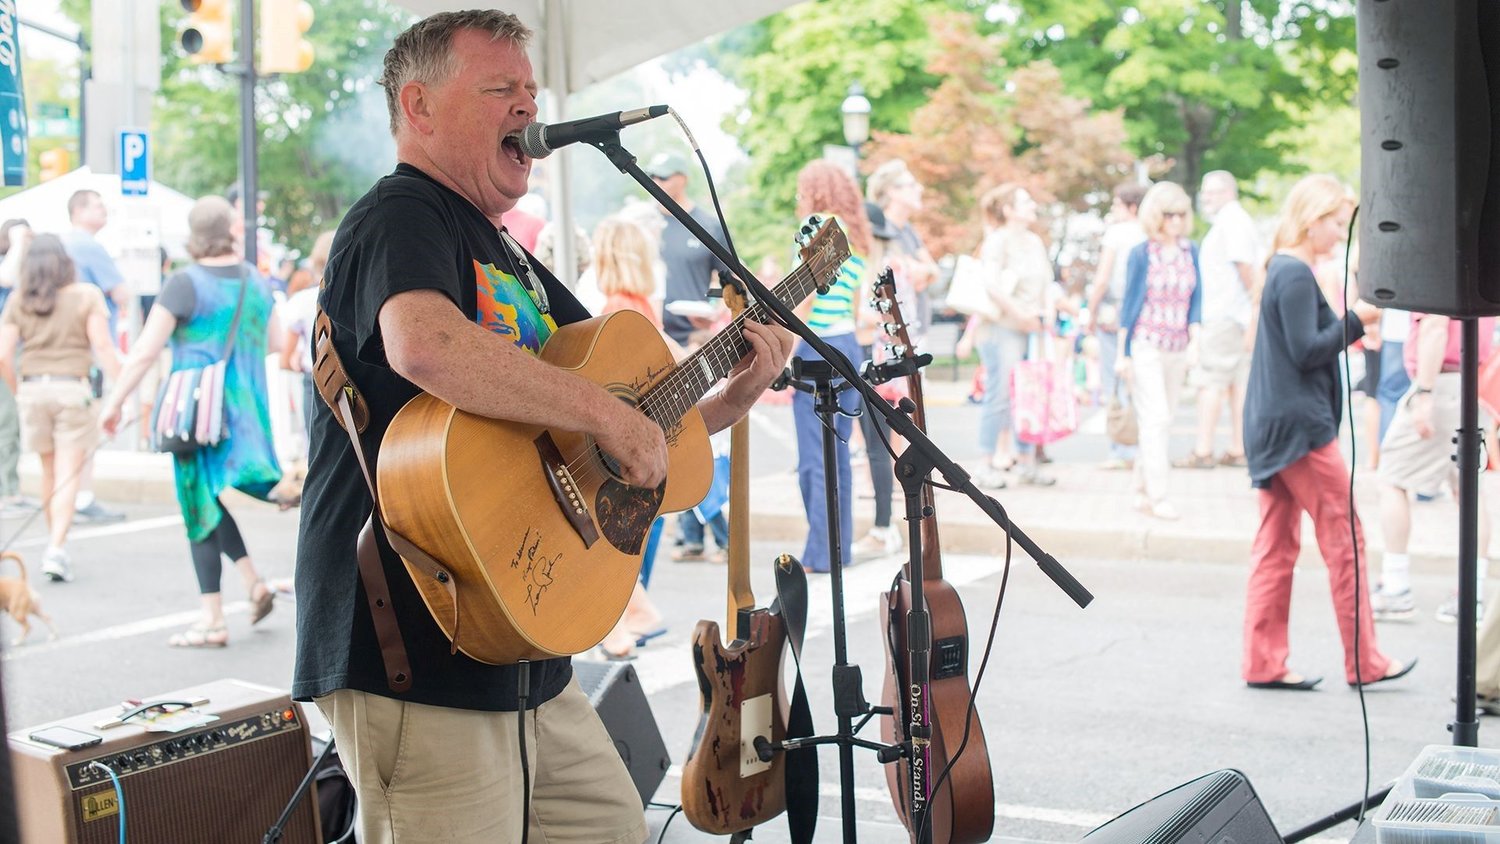 Doylestown Arts Festival will feature multiple performers on various stages in the borough on Sept. 10 and 11.